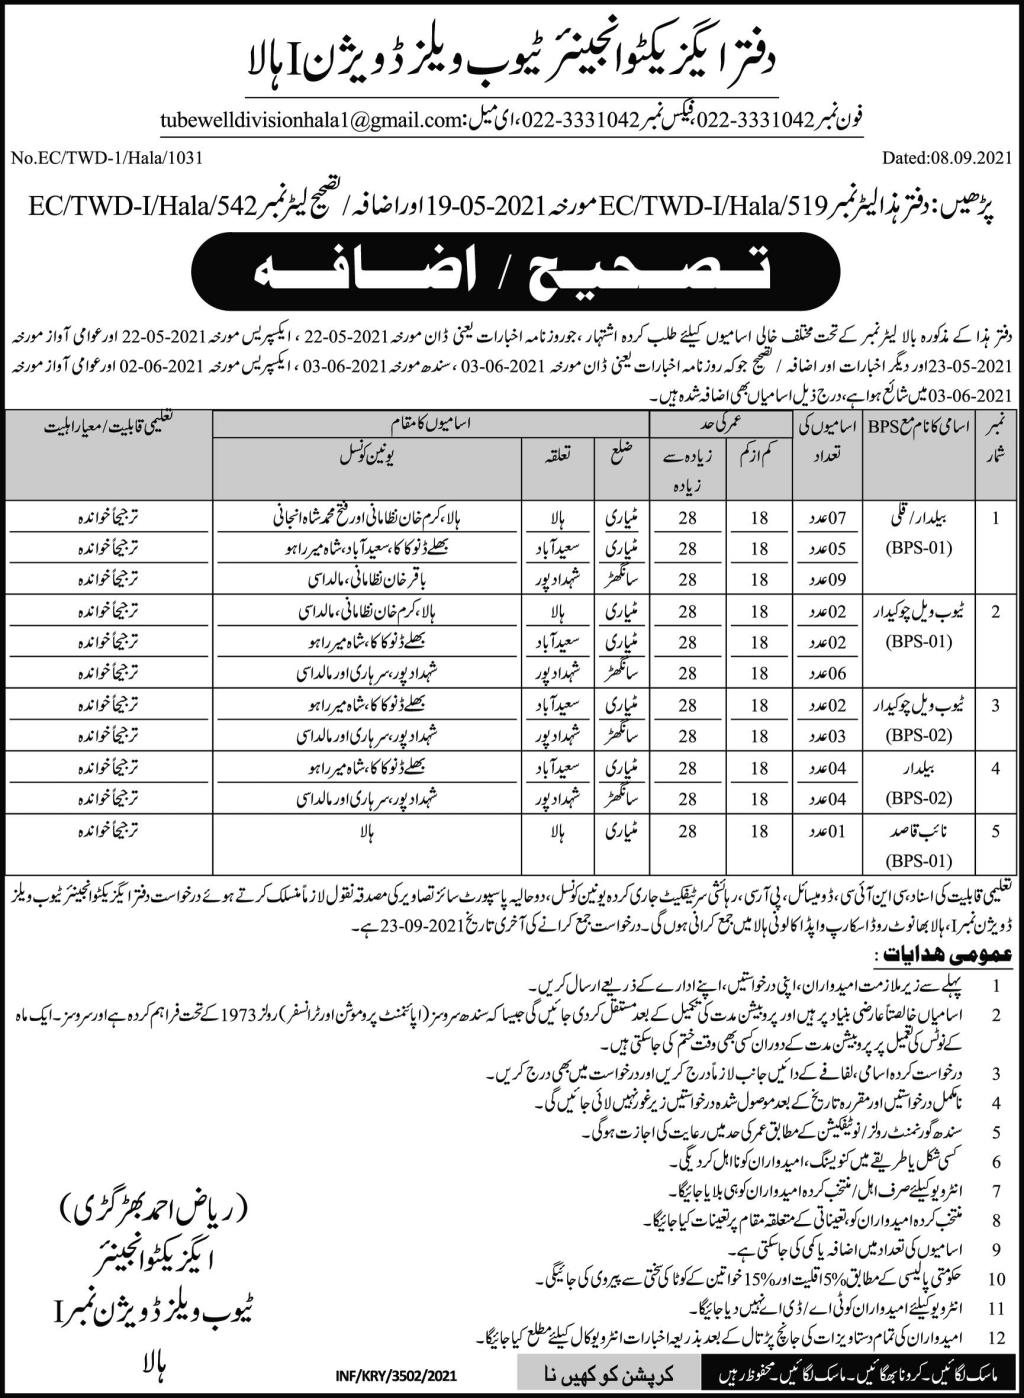 Office Of The Executive Engineer Tube Well Division Halla-I Jobs 2021